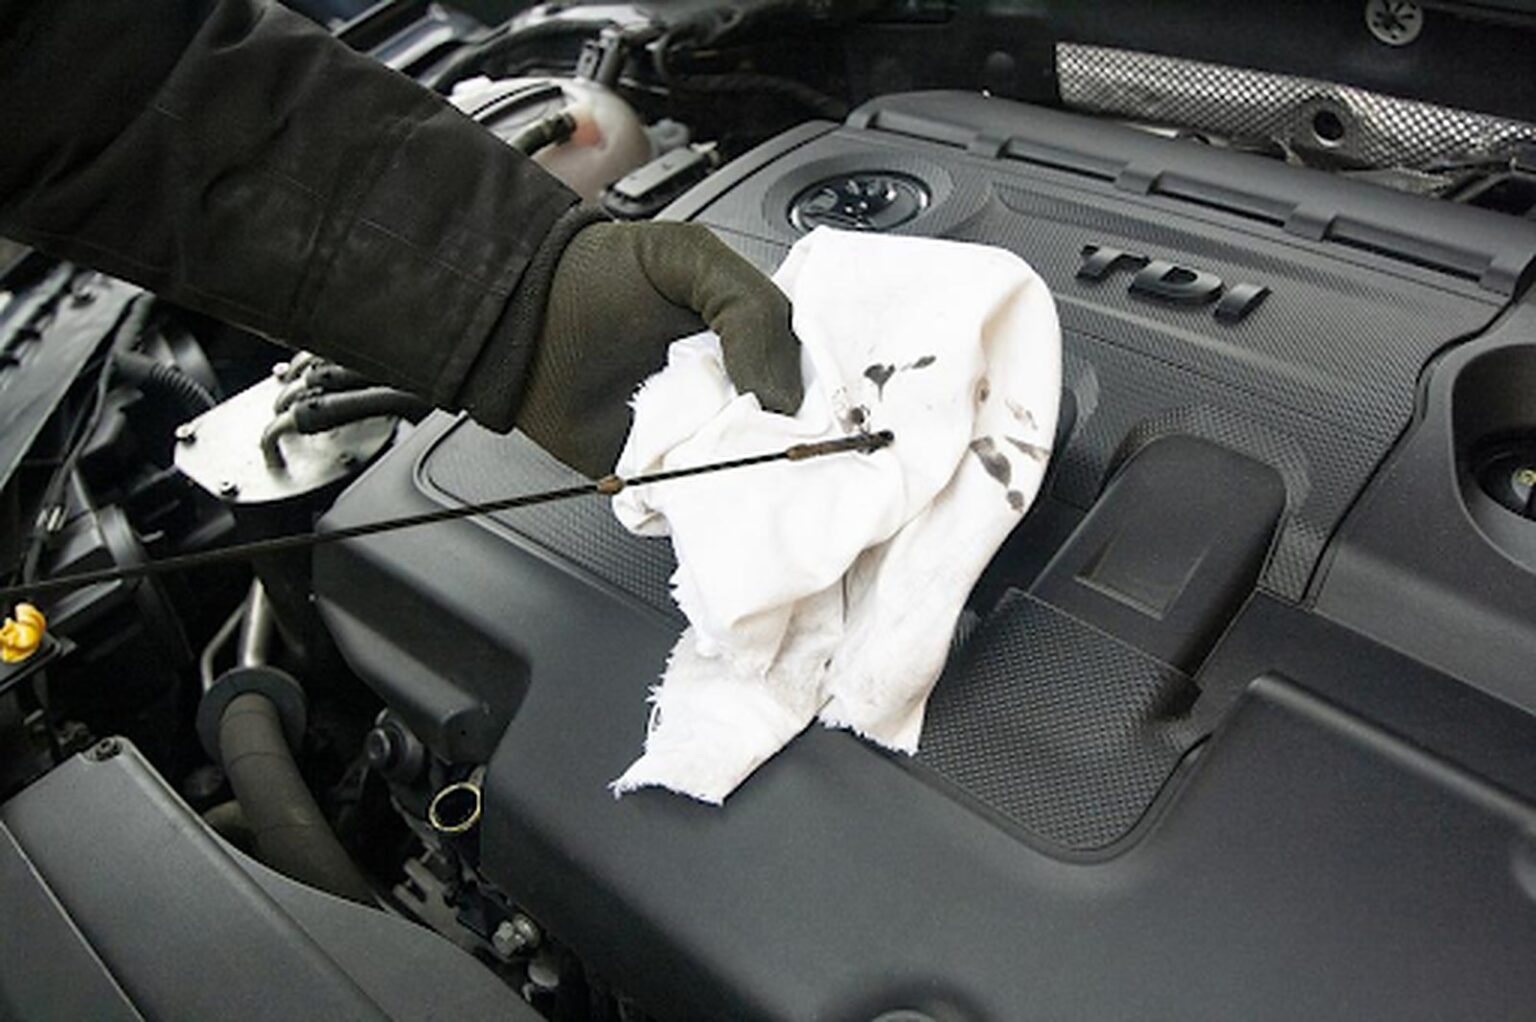 Give your car the freshest update it deserves with these 5 helpful tips!